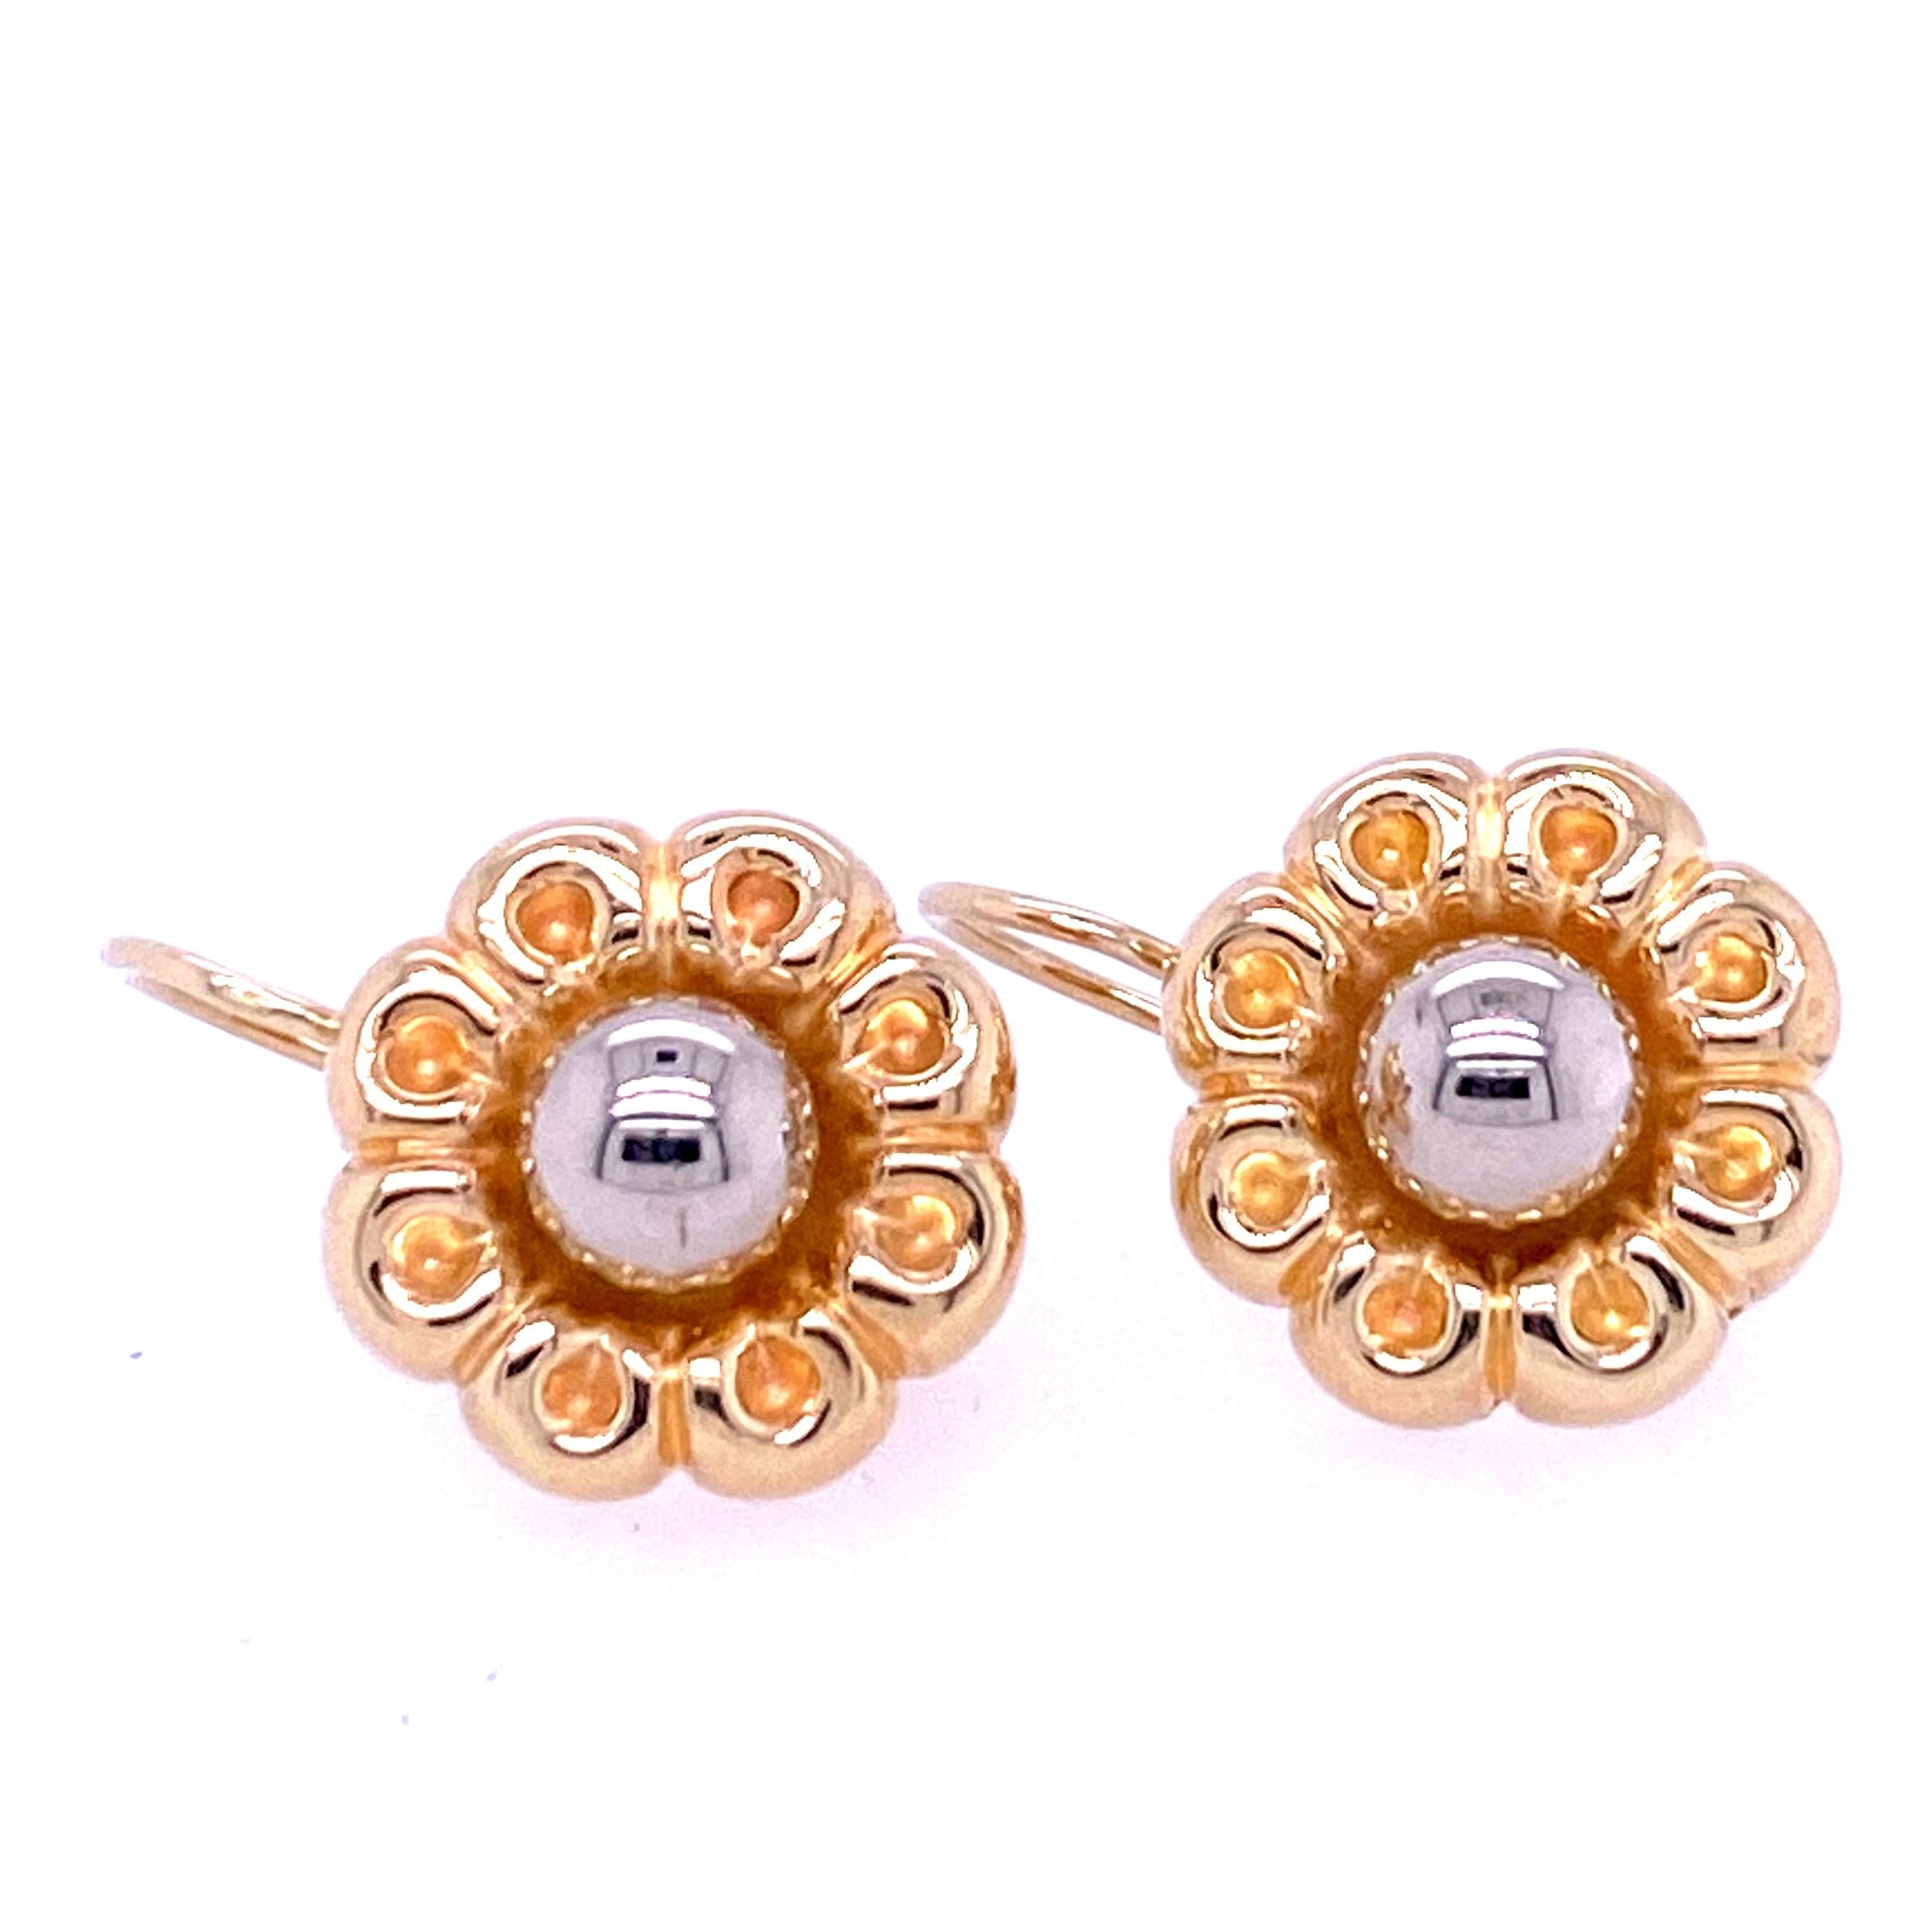 One pair of mixed metal flower earrings made in Italy, each feature a 14 karat white gold ball center surrounded by 14 karat yellow gold petals. The earrings measure 14.75mm in diameter and have leaverbacks.  Circa 1980s